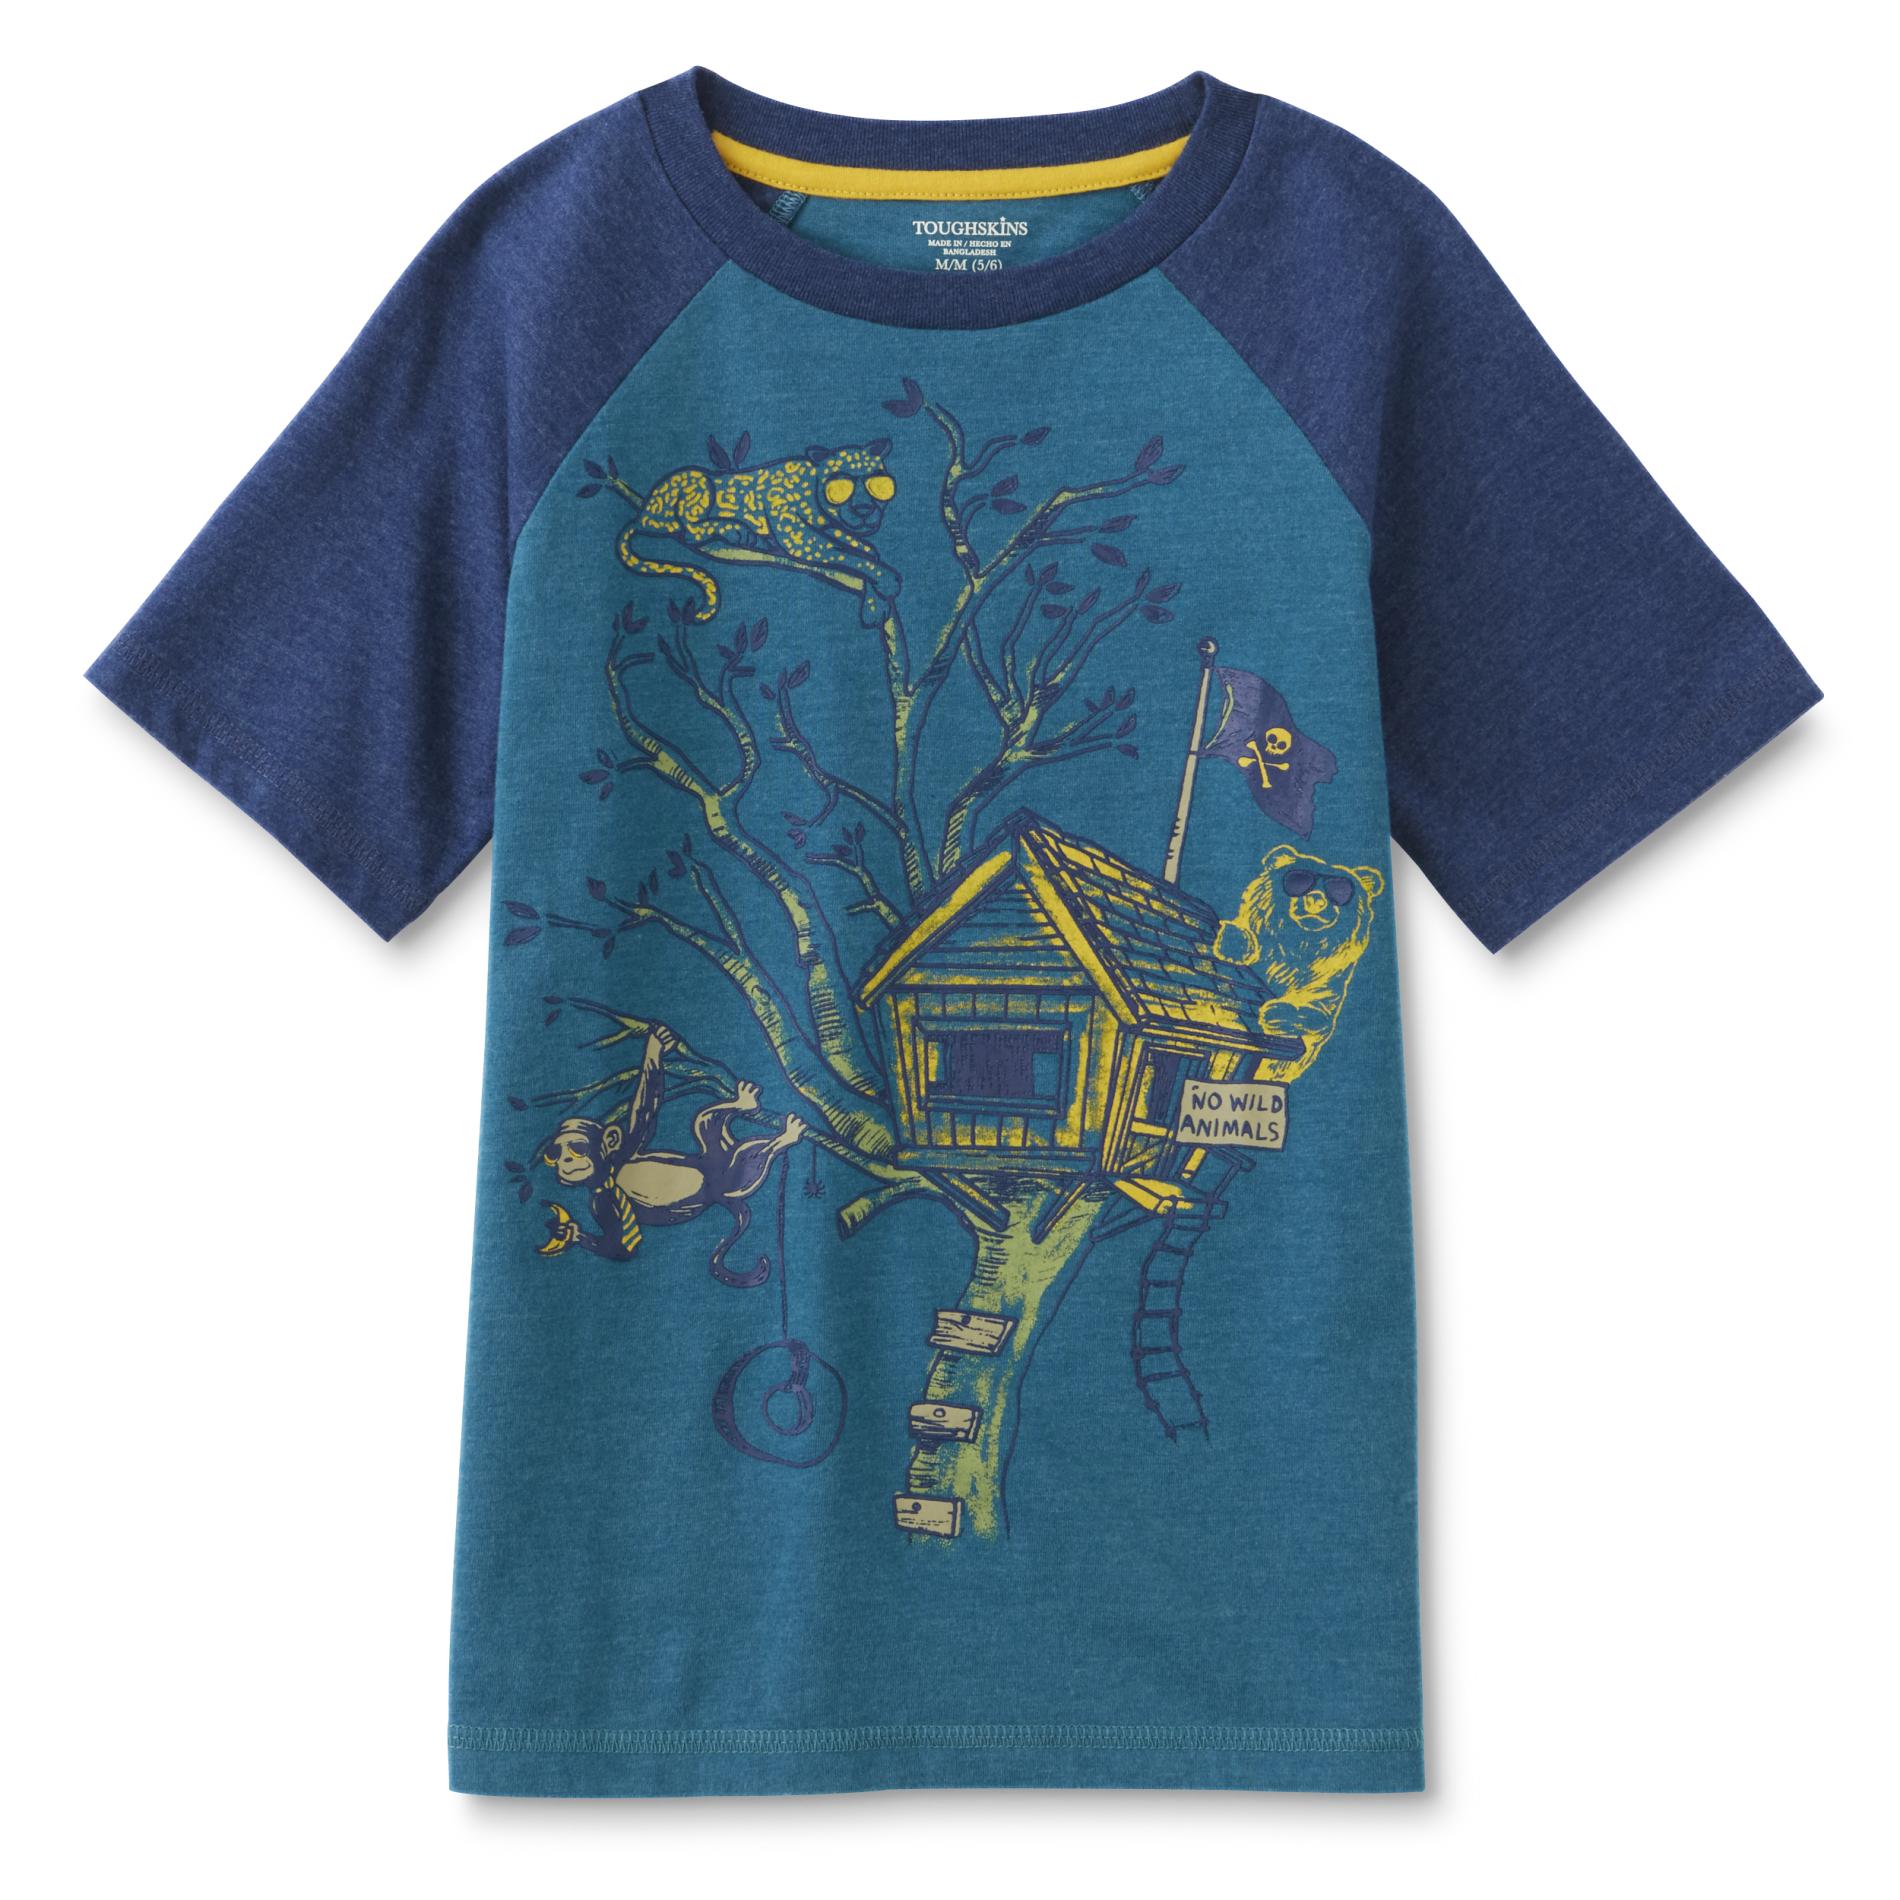 Toughskins Infant & Toddler Boy's Graphic T-Shirt - Tree House